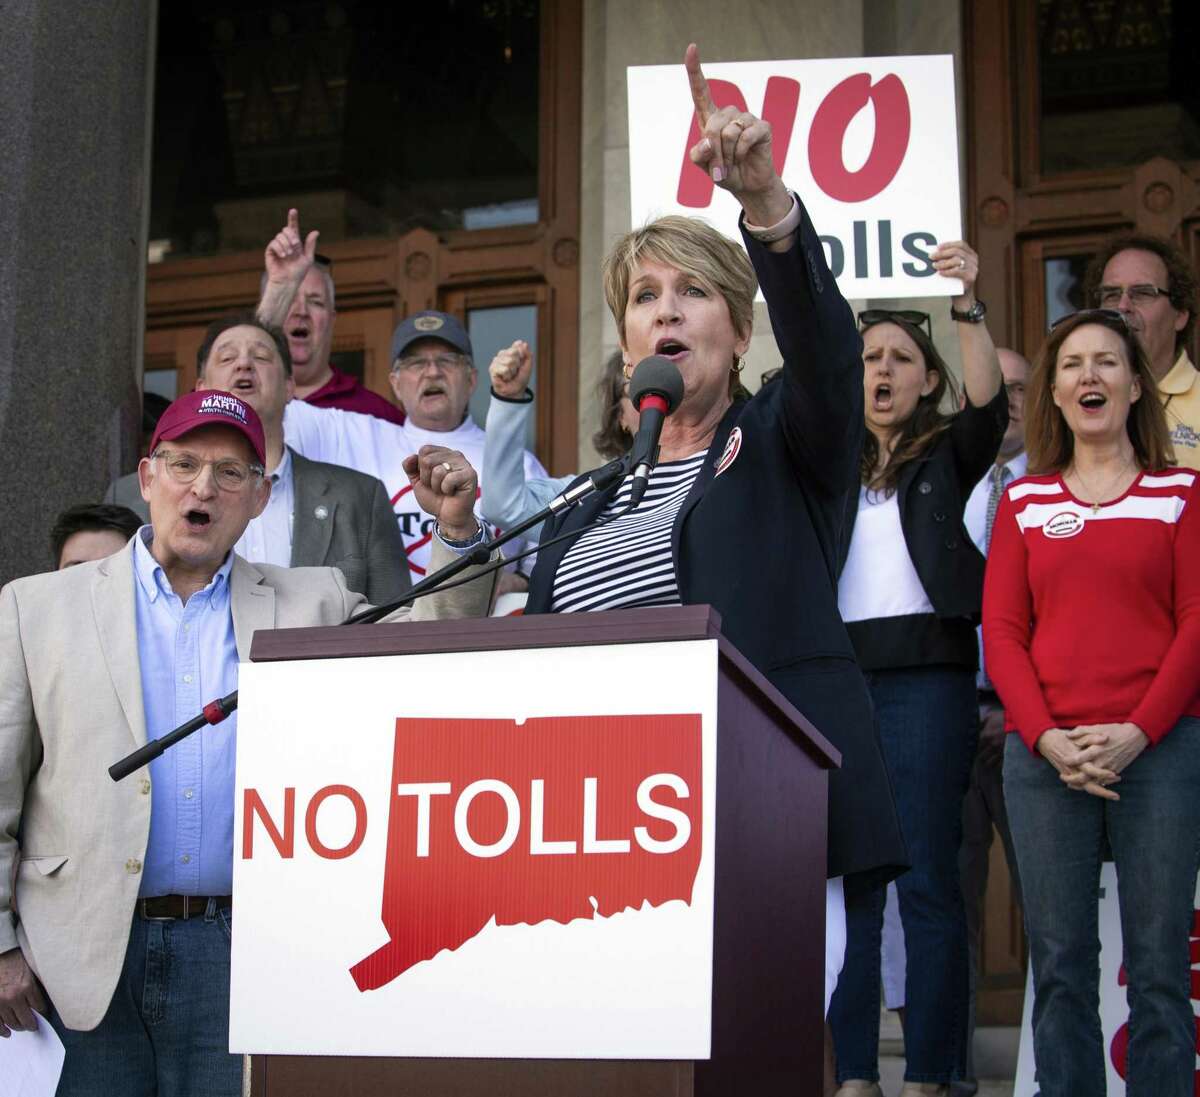 State Rep. Laura Devlin addresses the crowd of anti-toll protesters in front of the Capitol Building, Saturday, May 18, 2019 in Hartford, Conn. Protesters have gathered outside the state Capitol to rally against a proposal to put electronic tolls on the state's highways. Demonstrators on Saturday called the plan another tax increase state residents can't afford. They held "no tolls" signs and wore "no tolls" shirts as they criticized Democratic Gov. Ned Lamont's plan to raise money for highway improvements.(Melanie Stengel/Hartford Courant via AP)